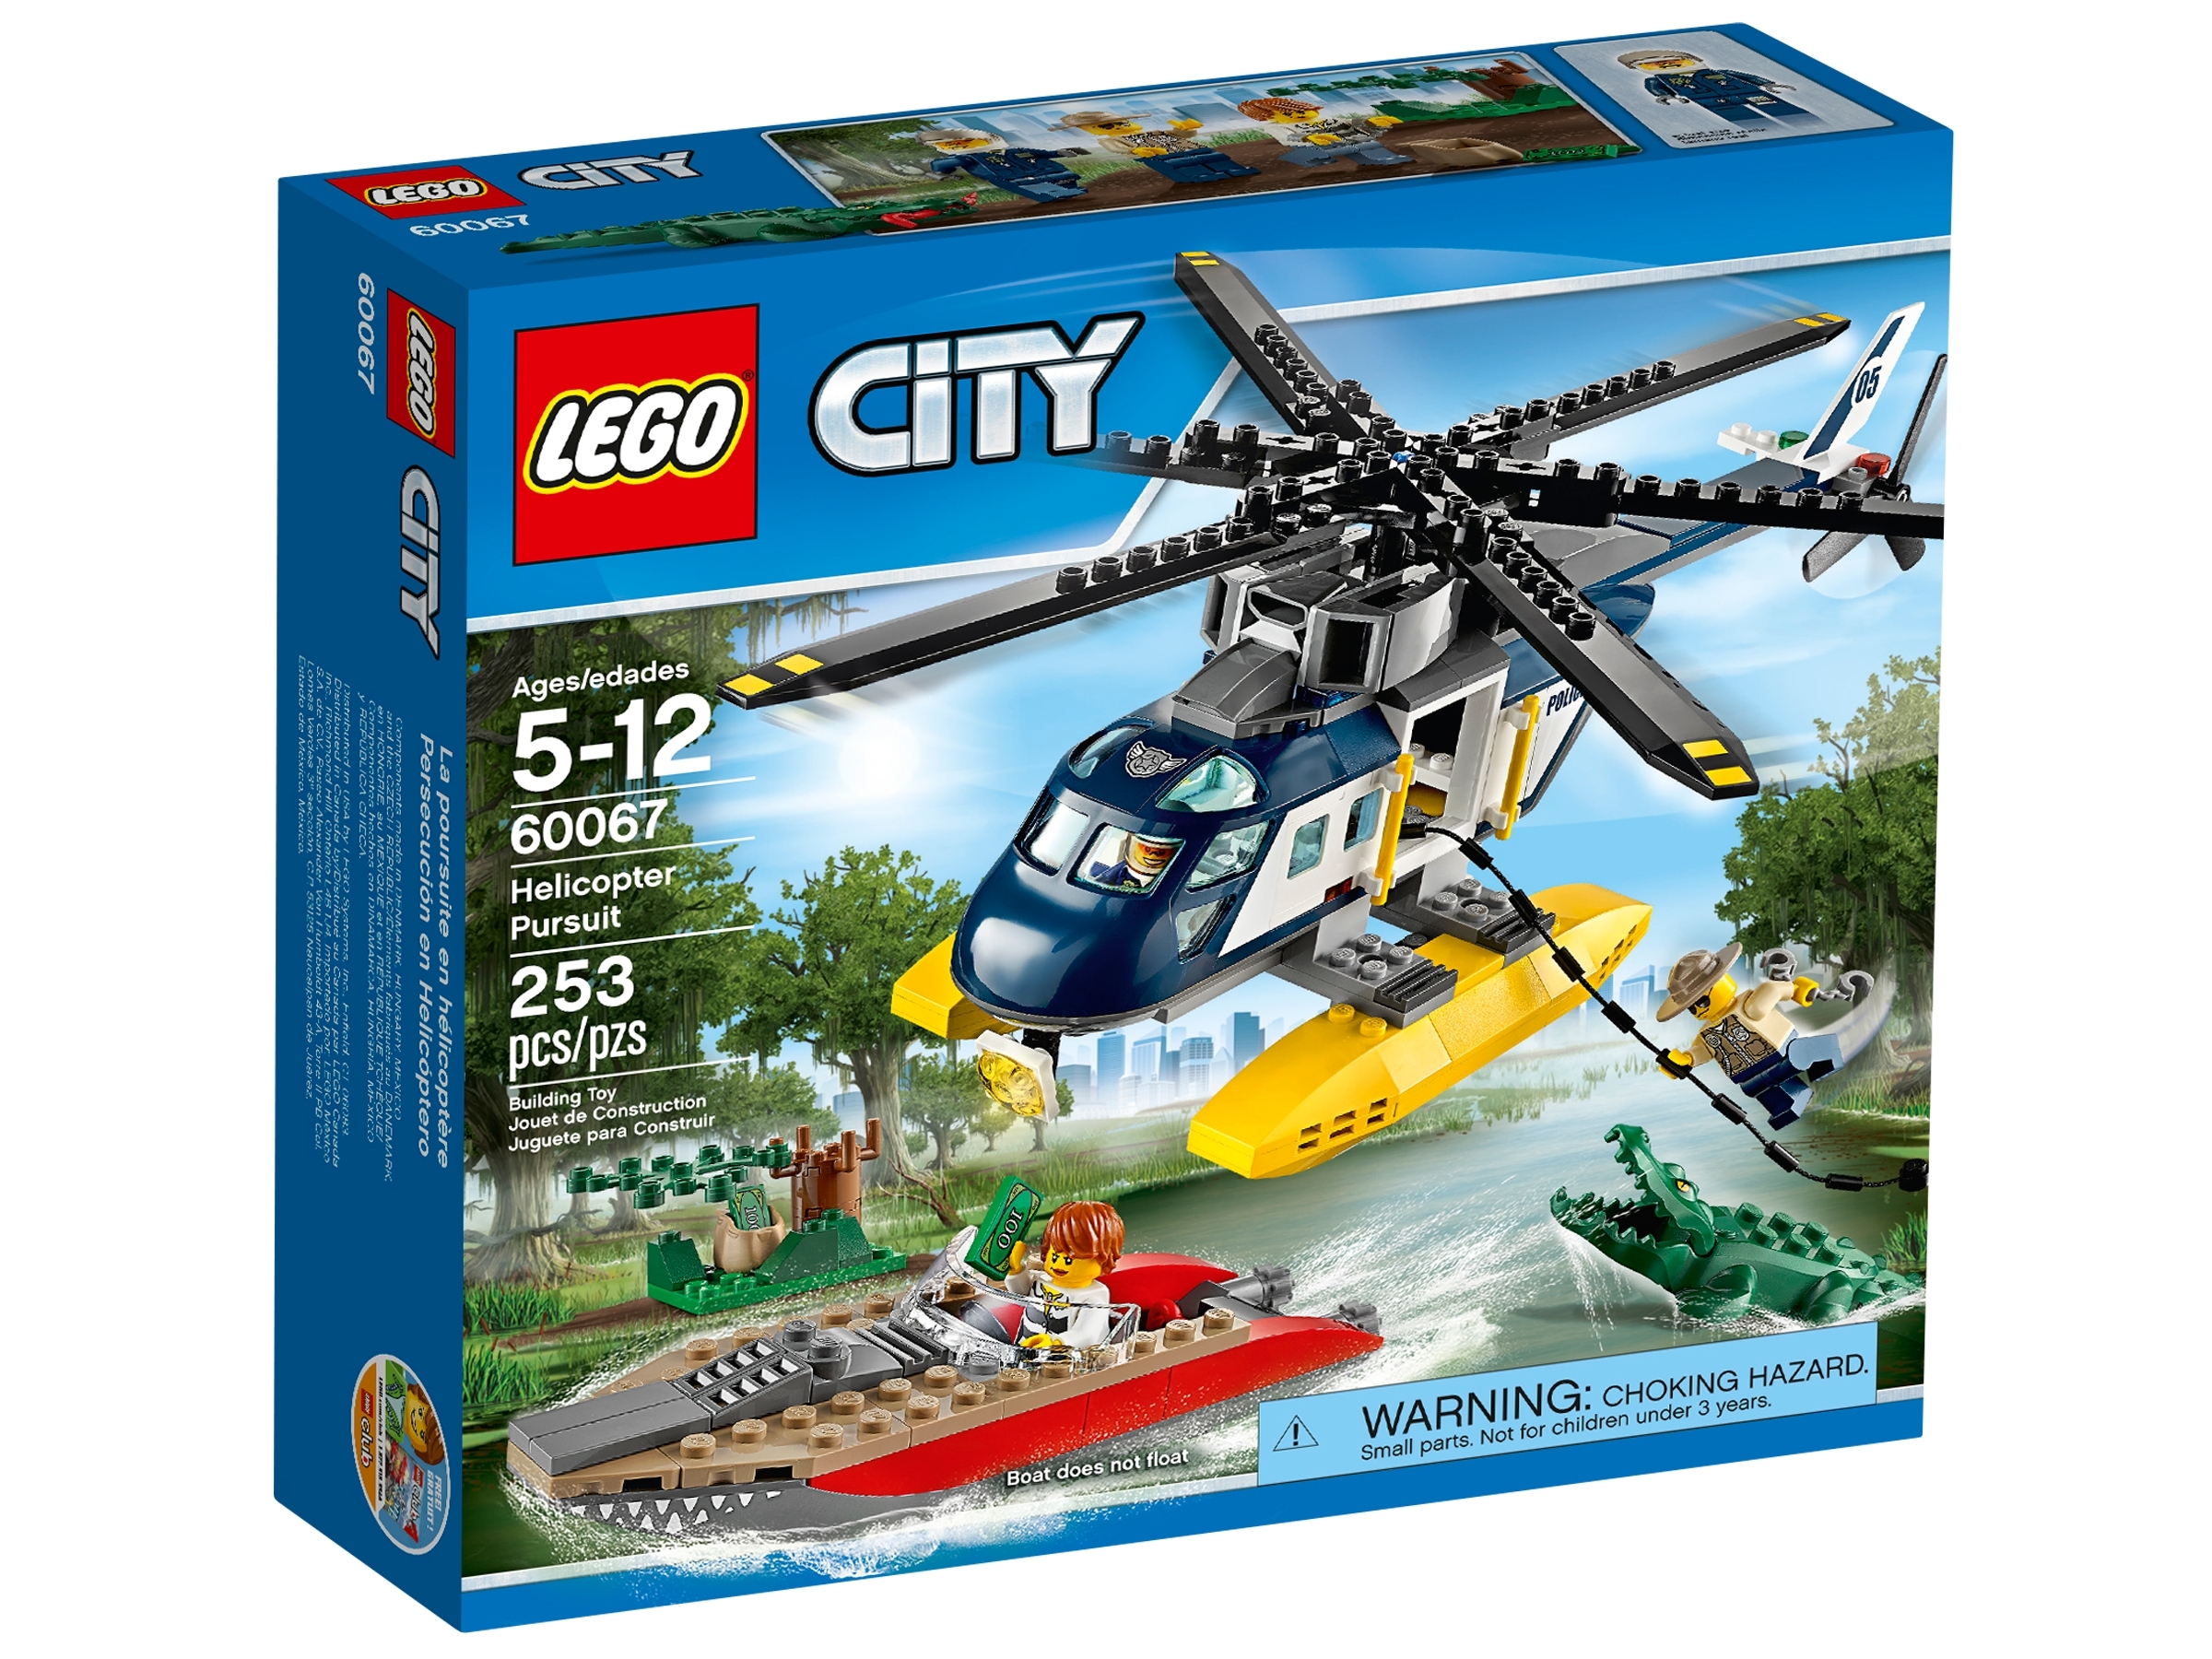 Helicopter Pursuit | City | online at the Official LEGO® Shop